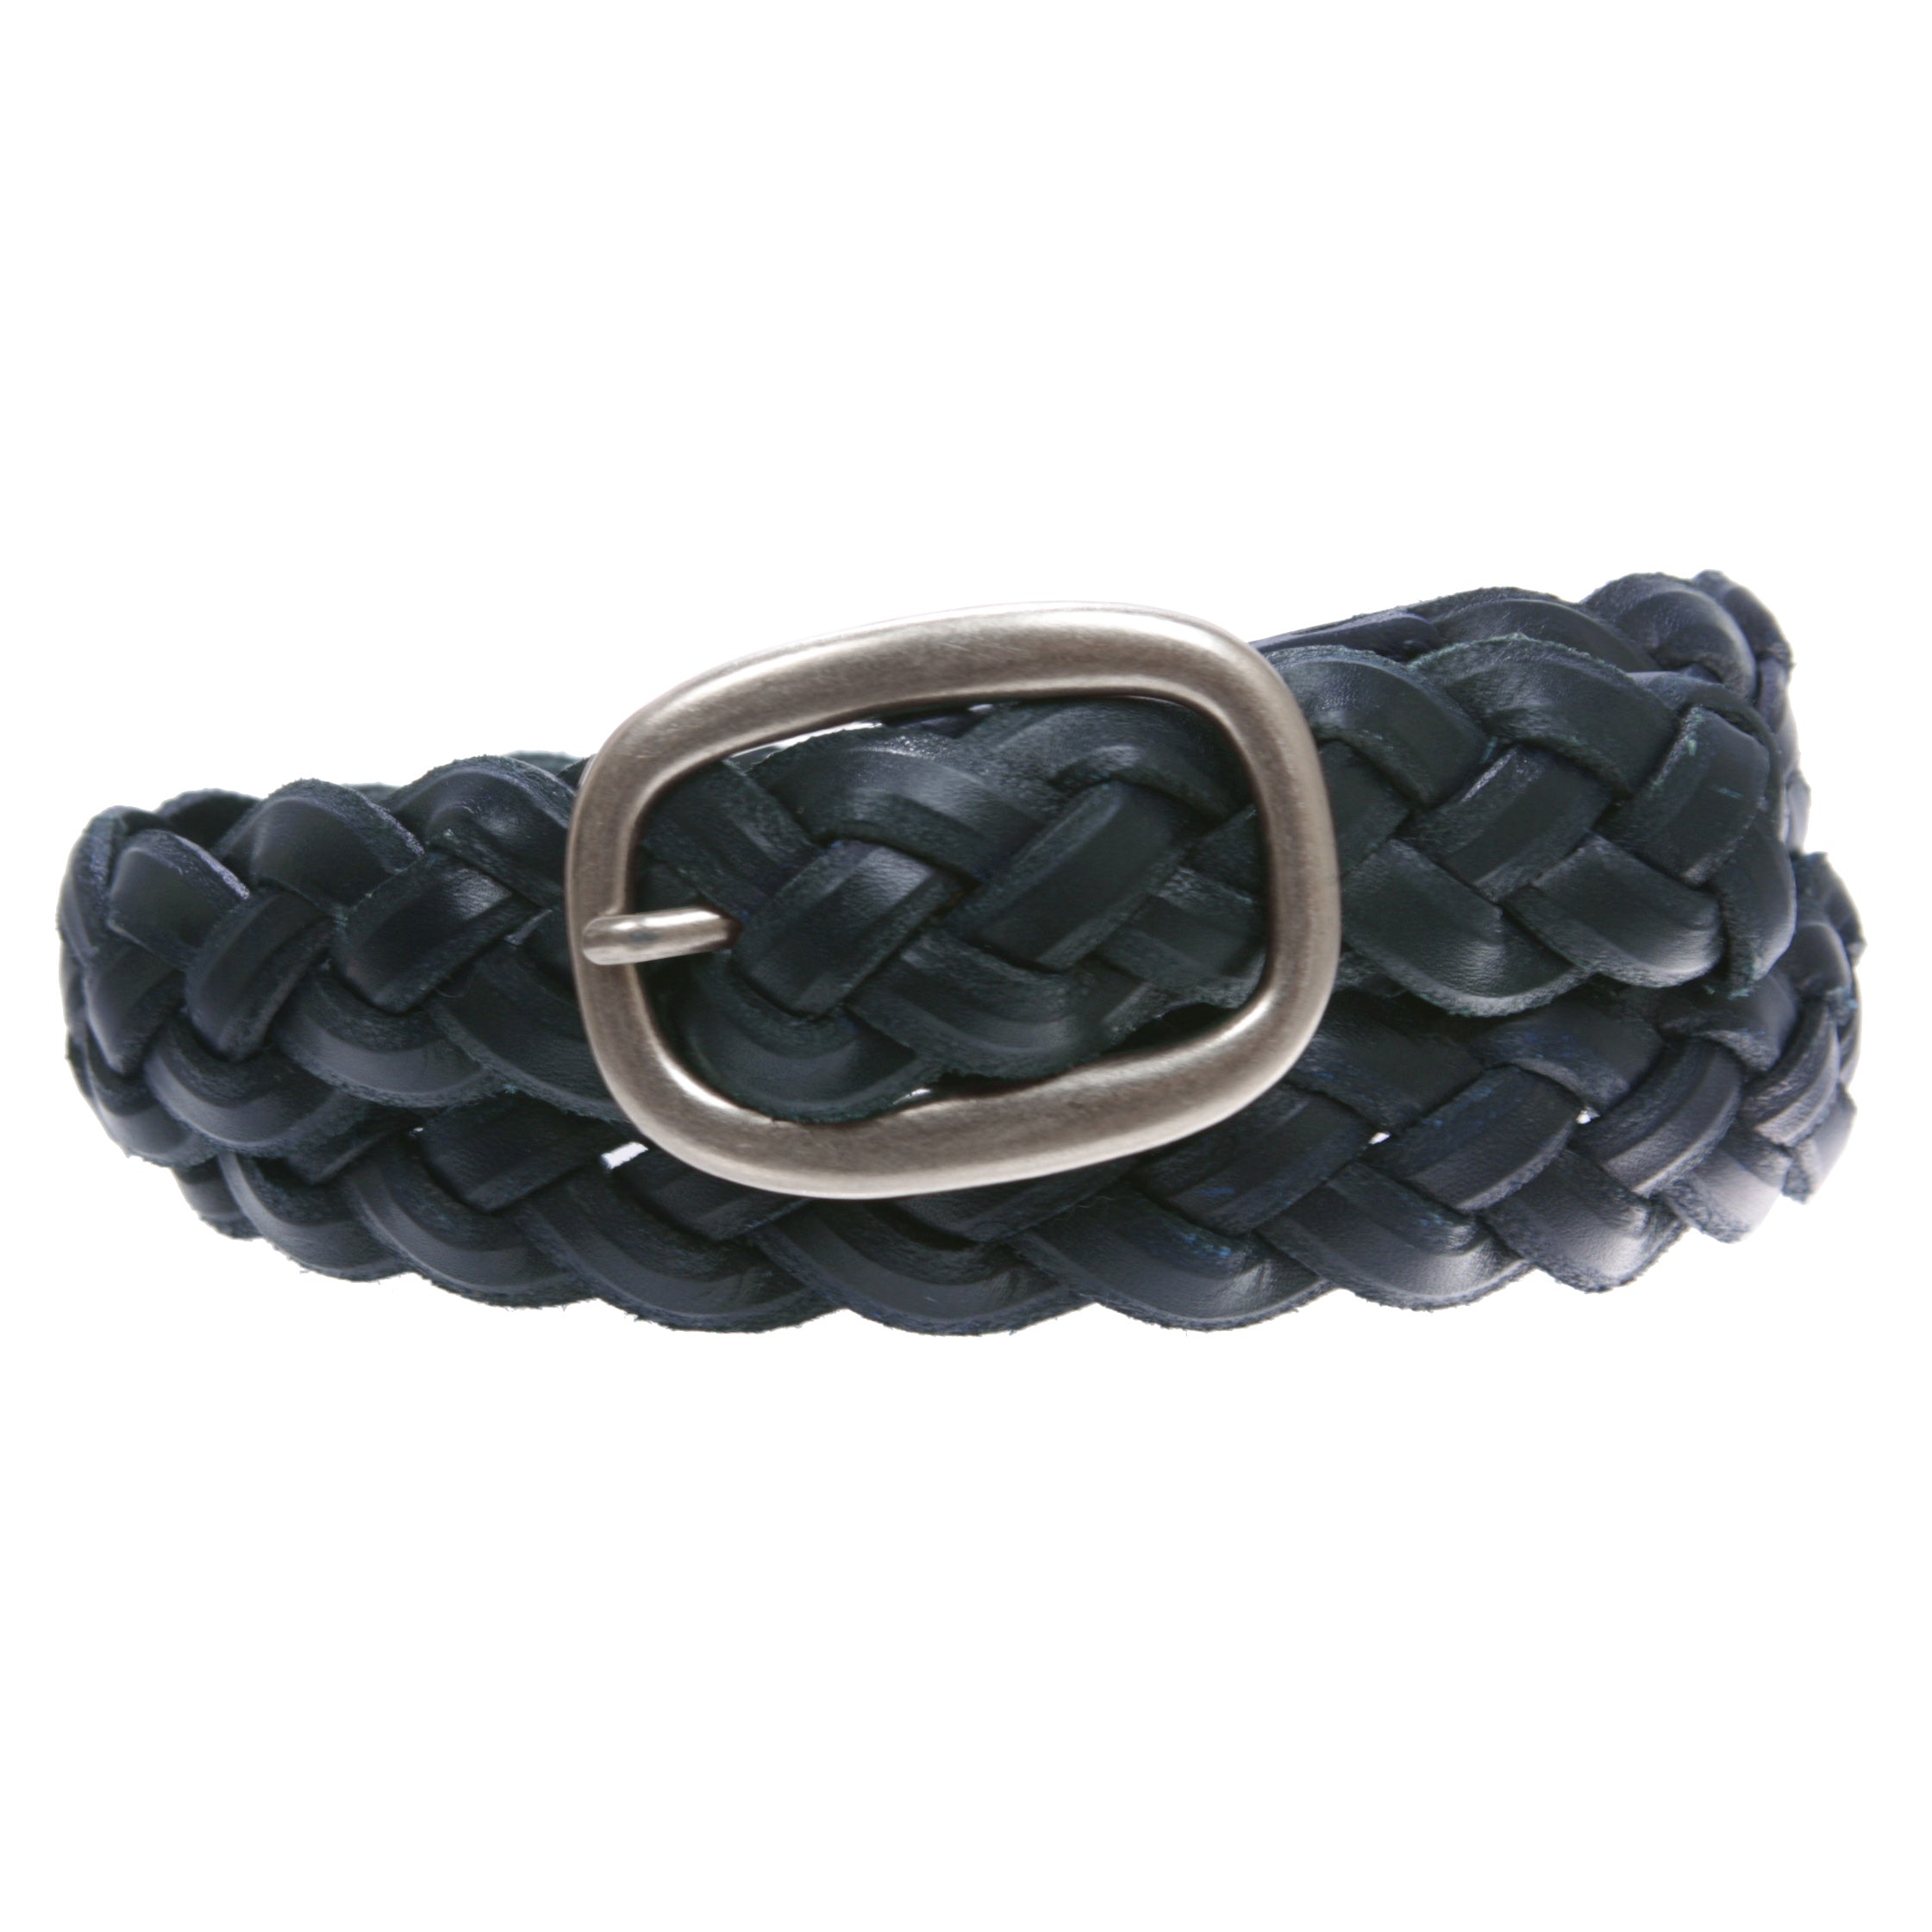 Women's 1 1/4" Braided Woven Cowhide Top Full Grain Solid Two-Tone 3D Style Vintage Leather Belt